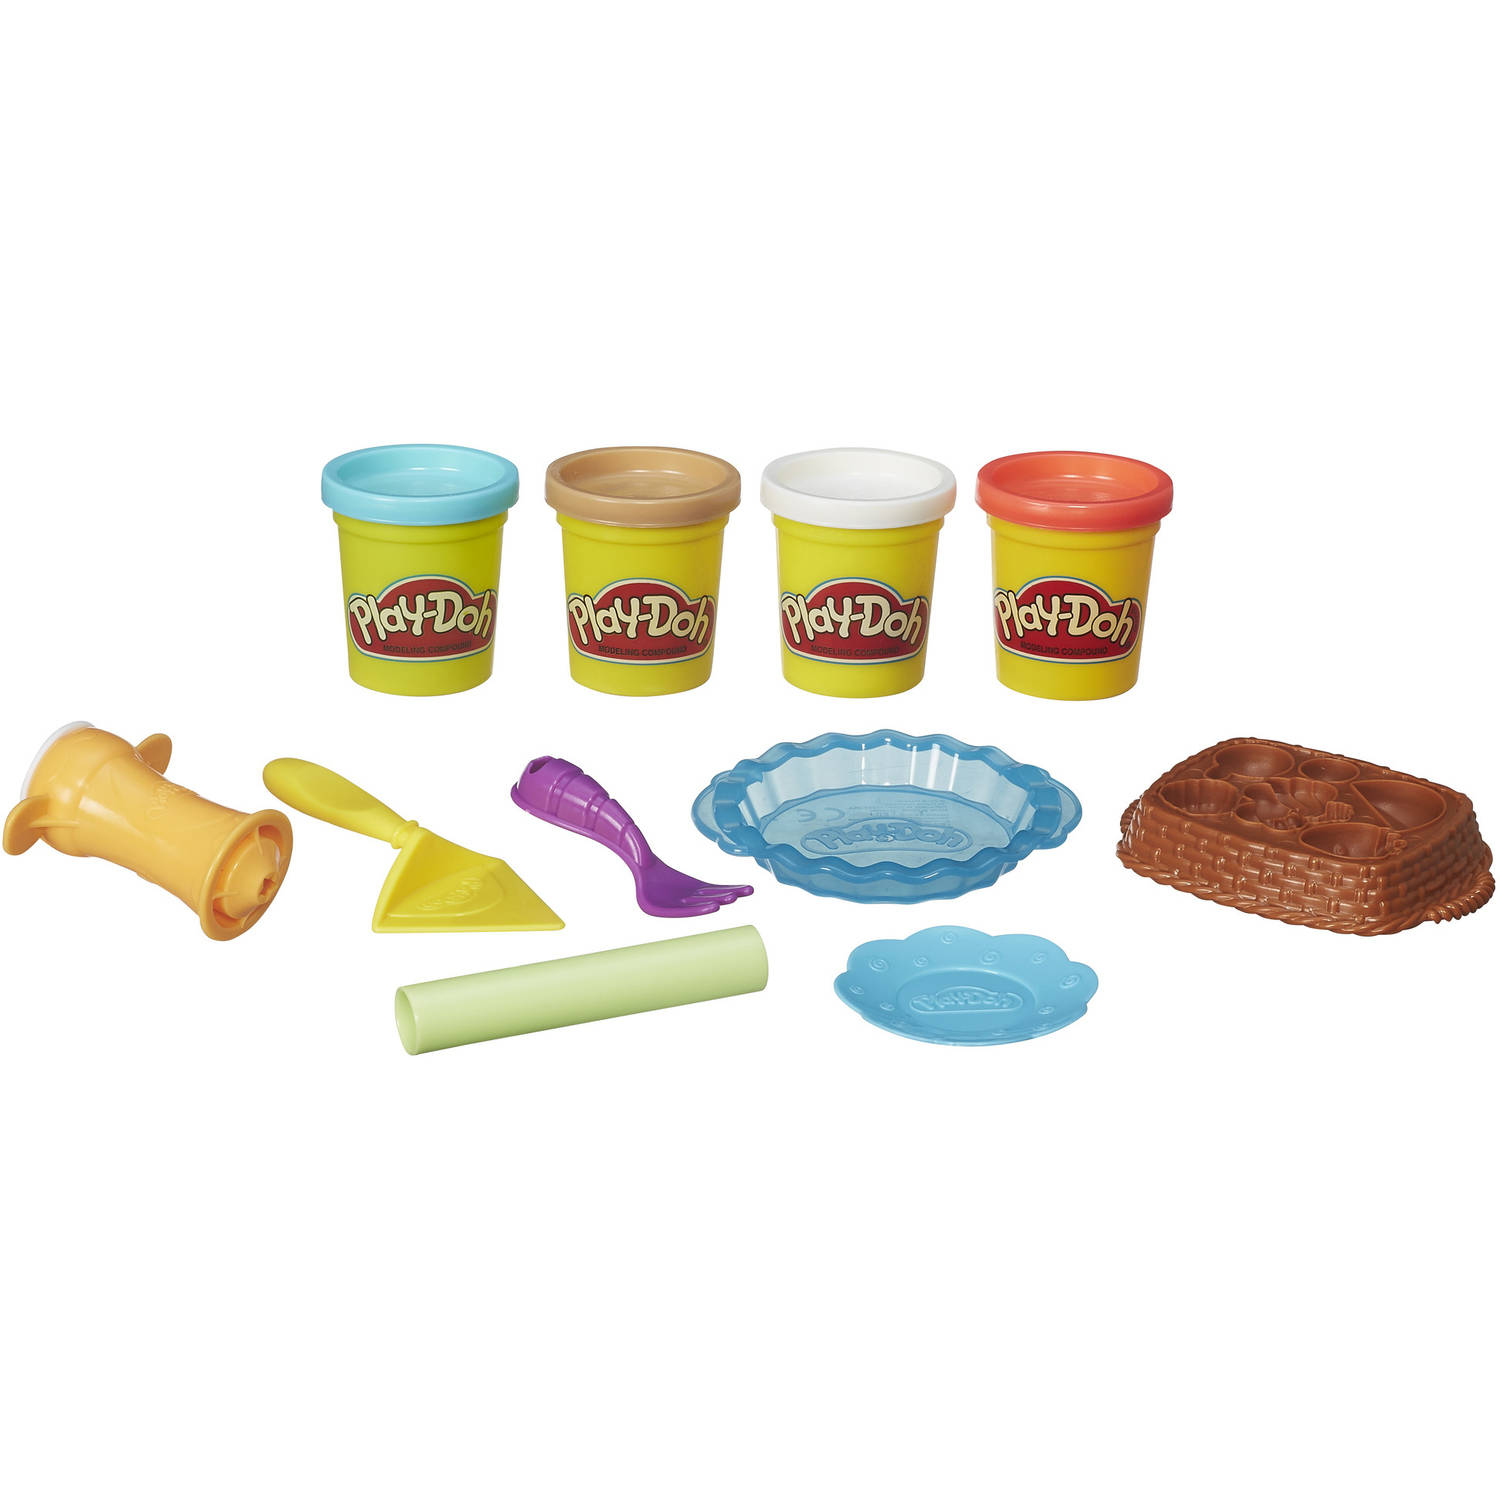 Play-Doh Kitchen Creations Playful Pies Set with 4 Cans - image 2 of 4